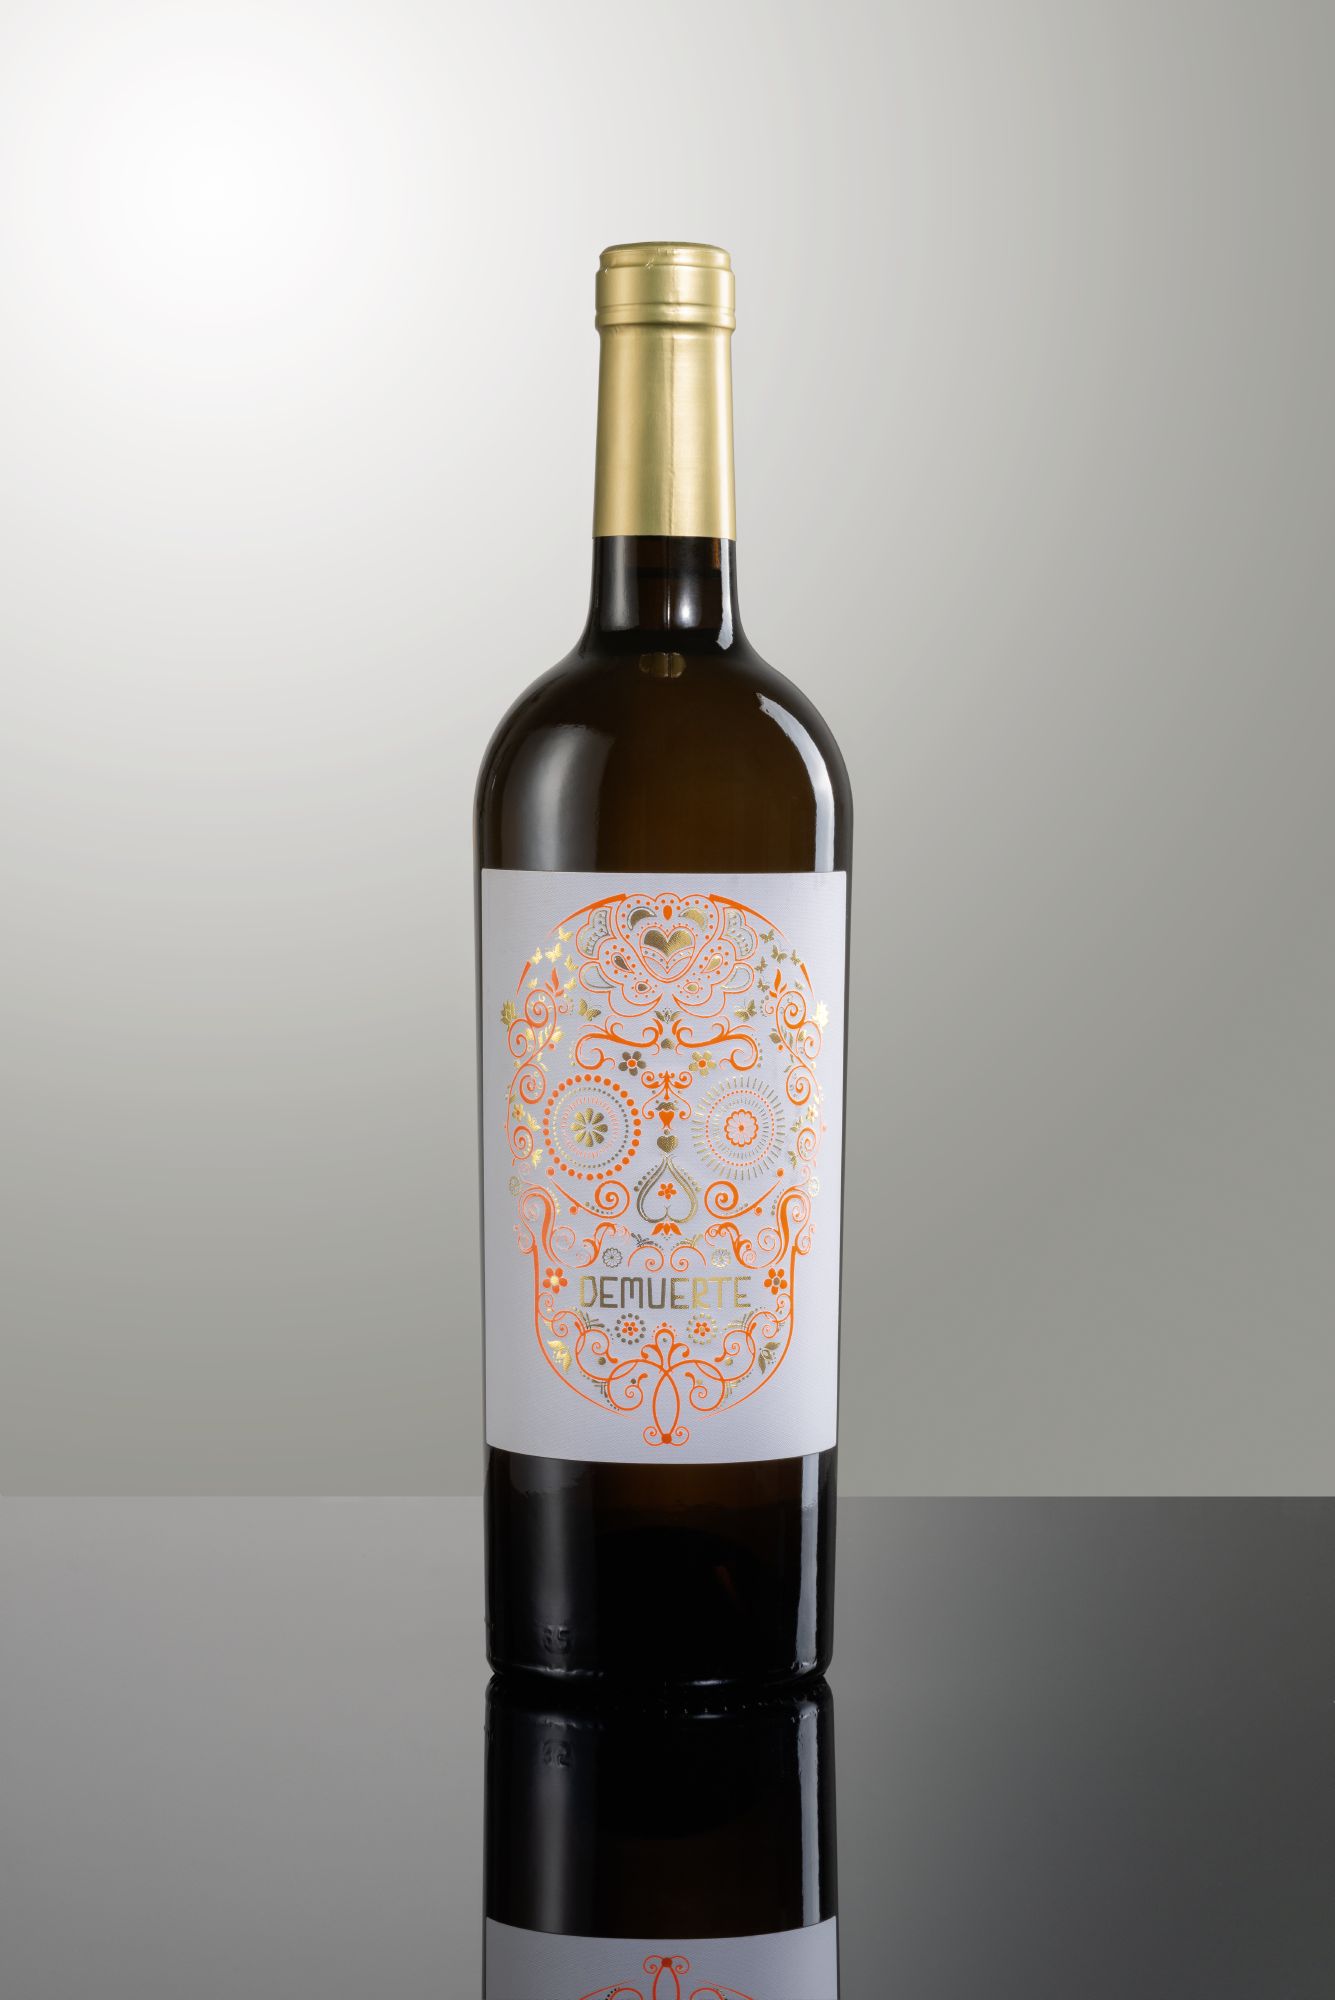  A wine bottle with foiling on its label 